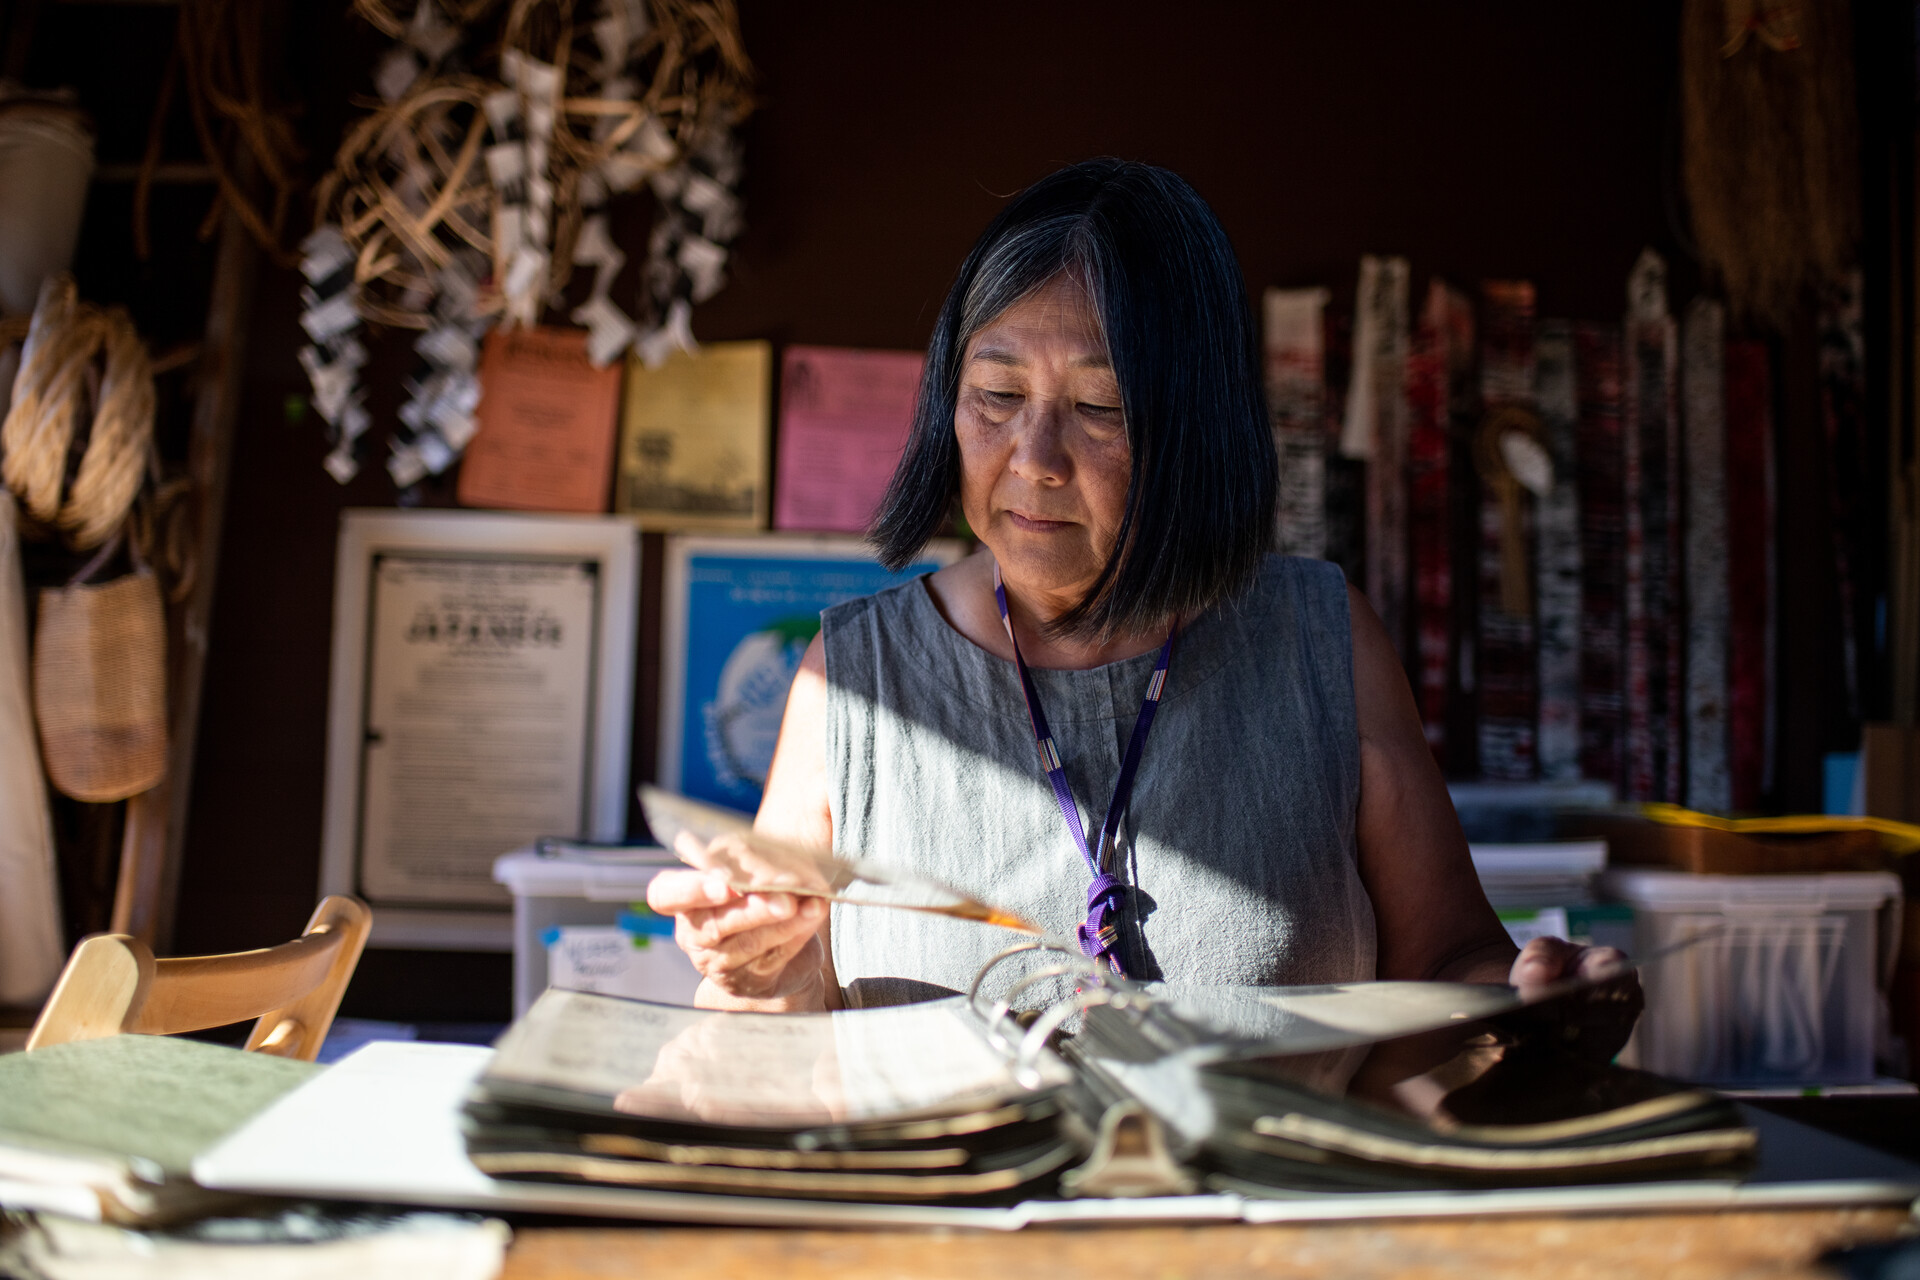 An older Asian woman with straight black hair with streaks of grey at the front wears a grey sleeveless shirt, and sits at a table surrounded by papers and books. She is holding one piece of paper in her right hand and looking at it.